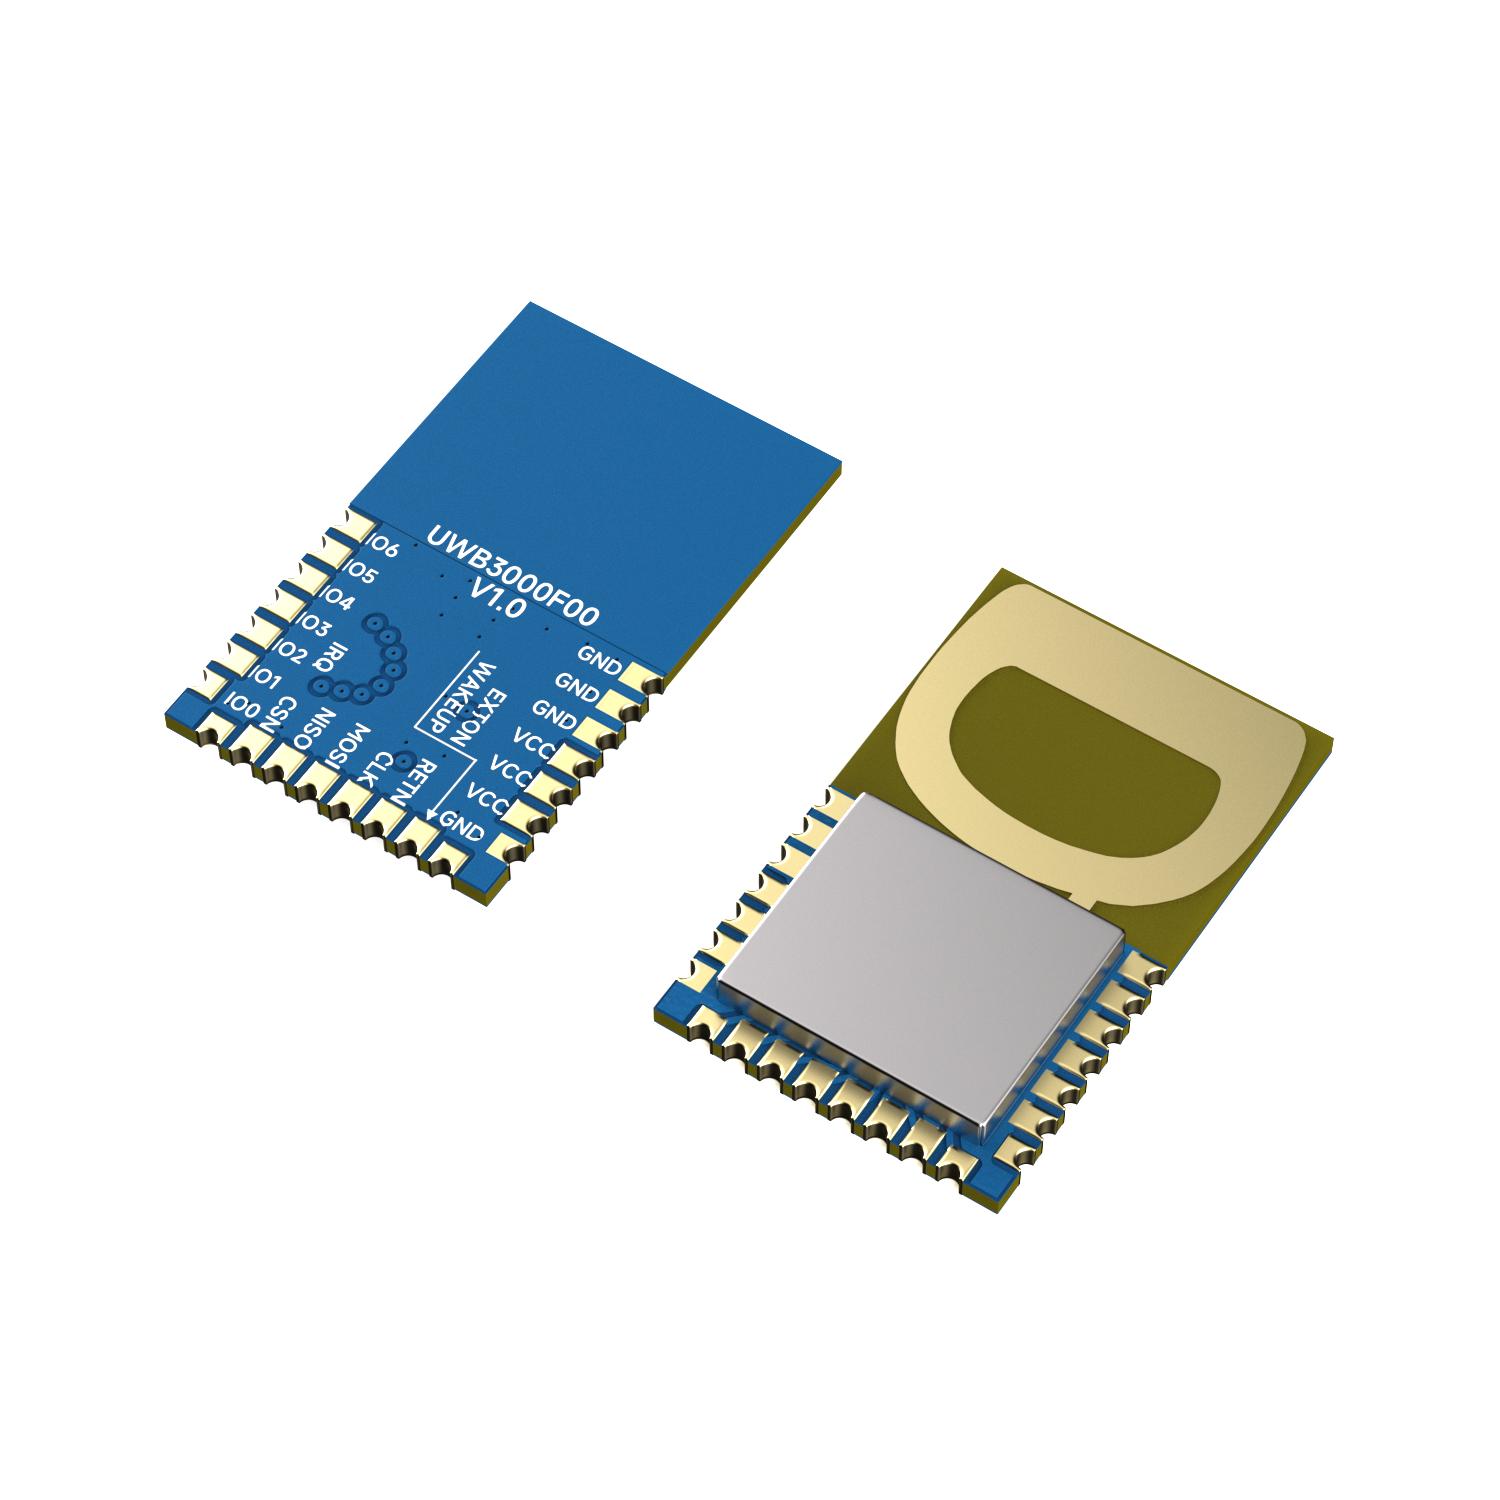 UWB3000F00 : Low-Power Bi-Directional Ranging Transceiver For Precision Positioning And Ranging